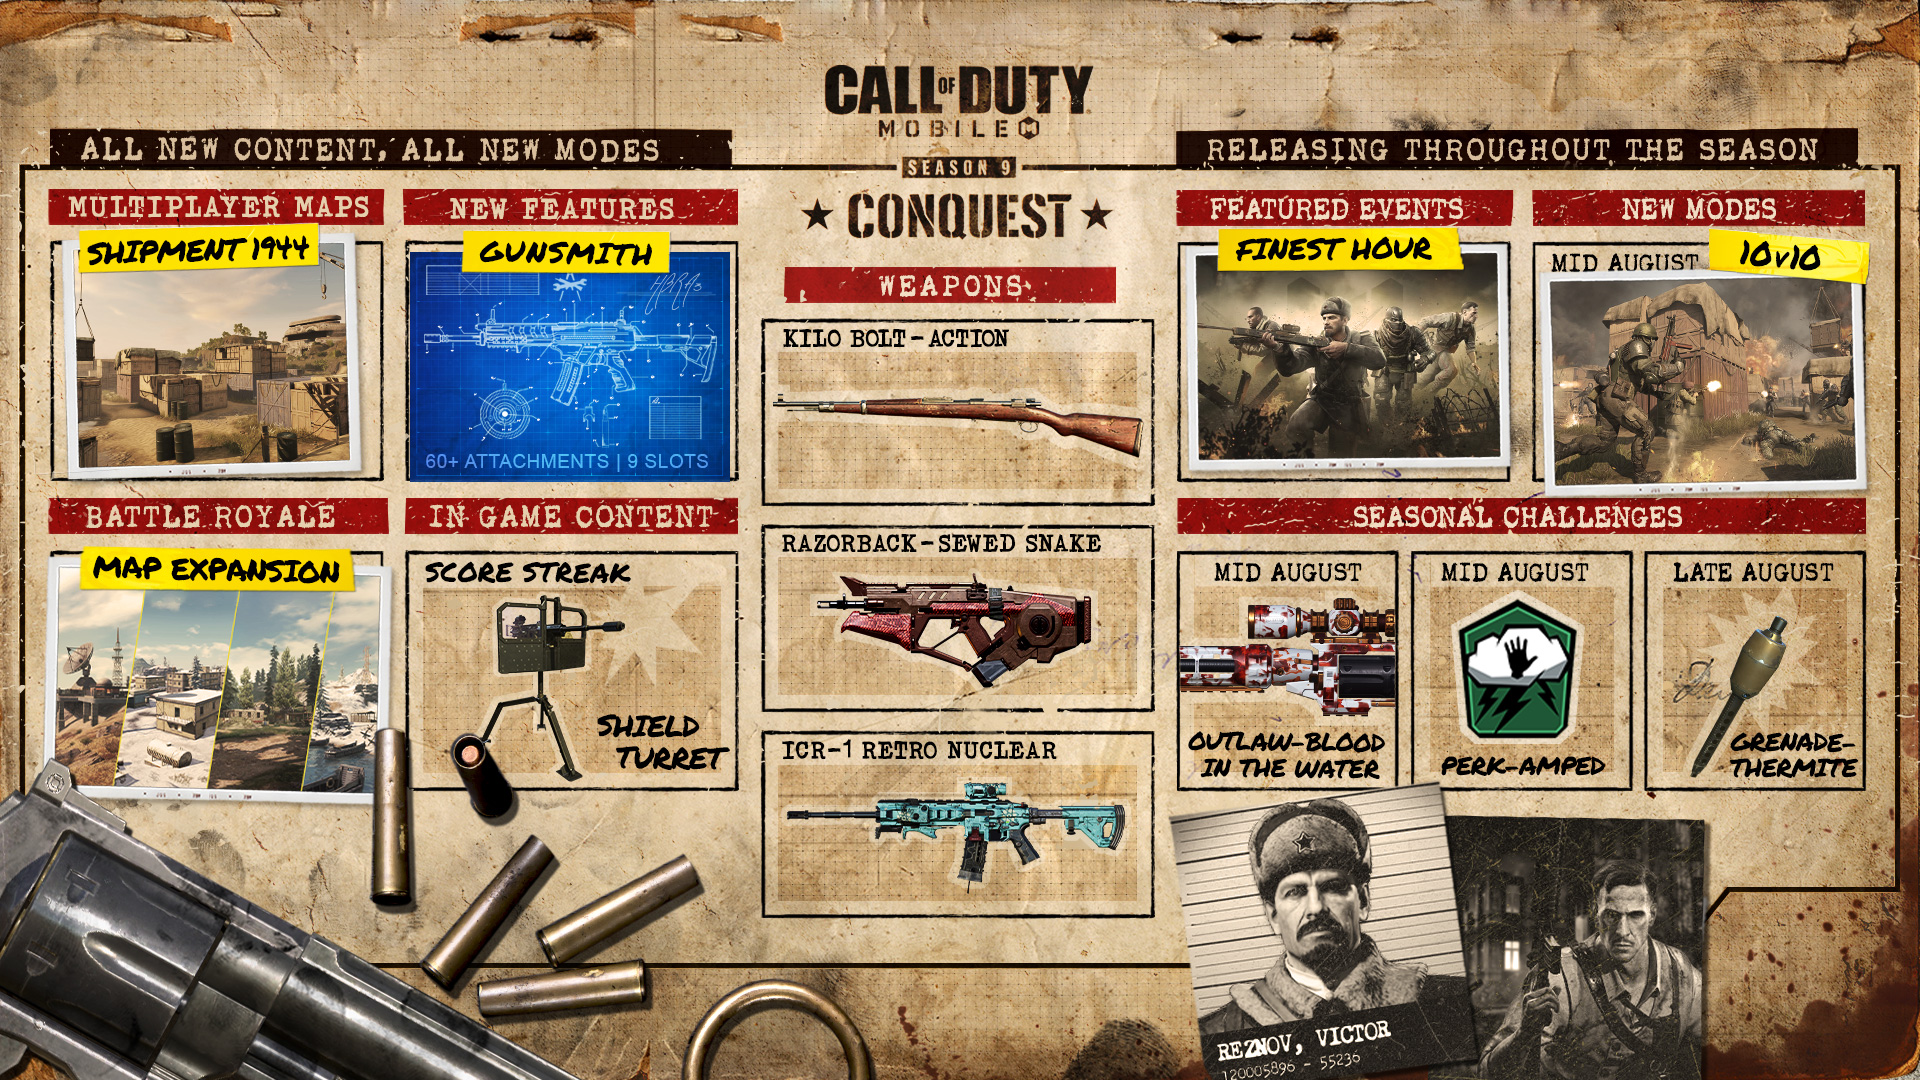 Introducing Conquest The New Season Of Call Of Duty Mobile